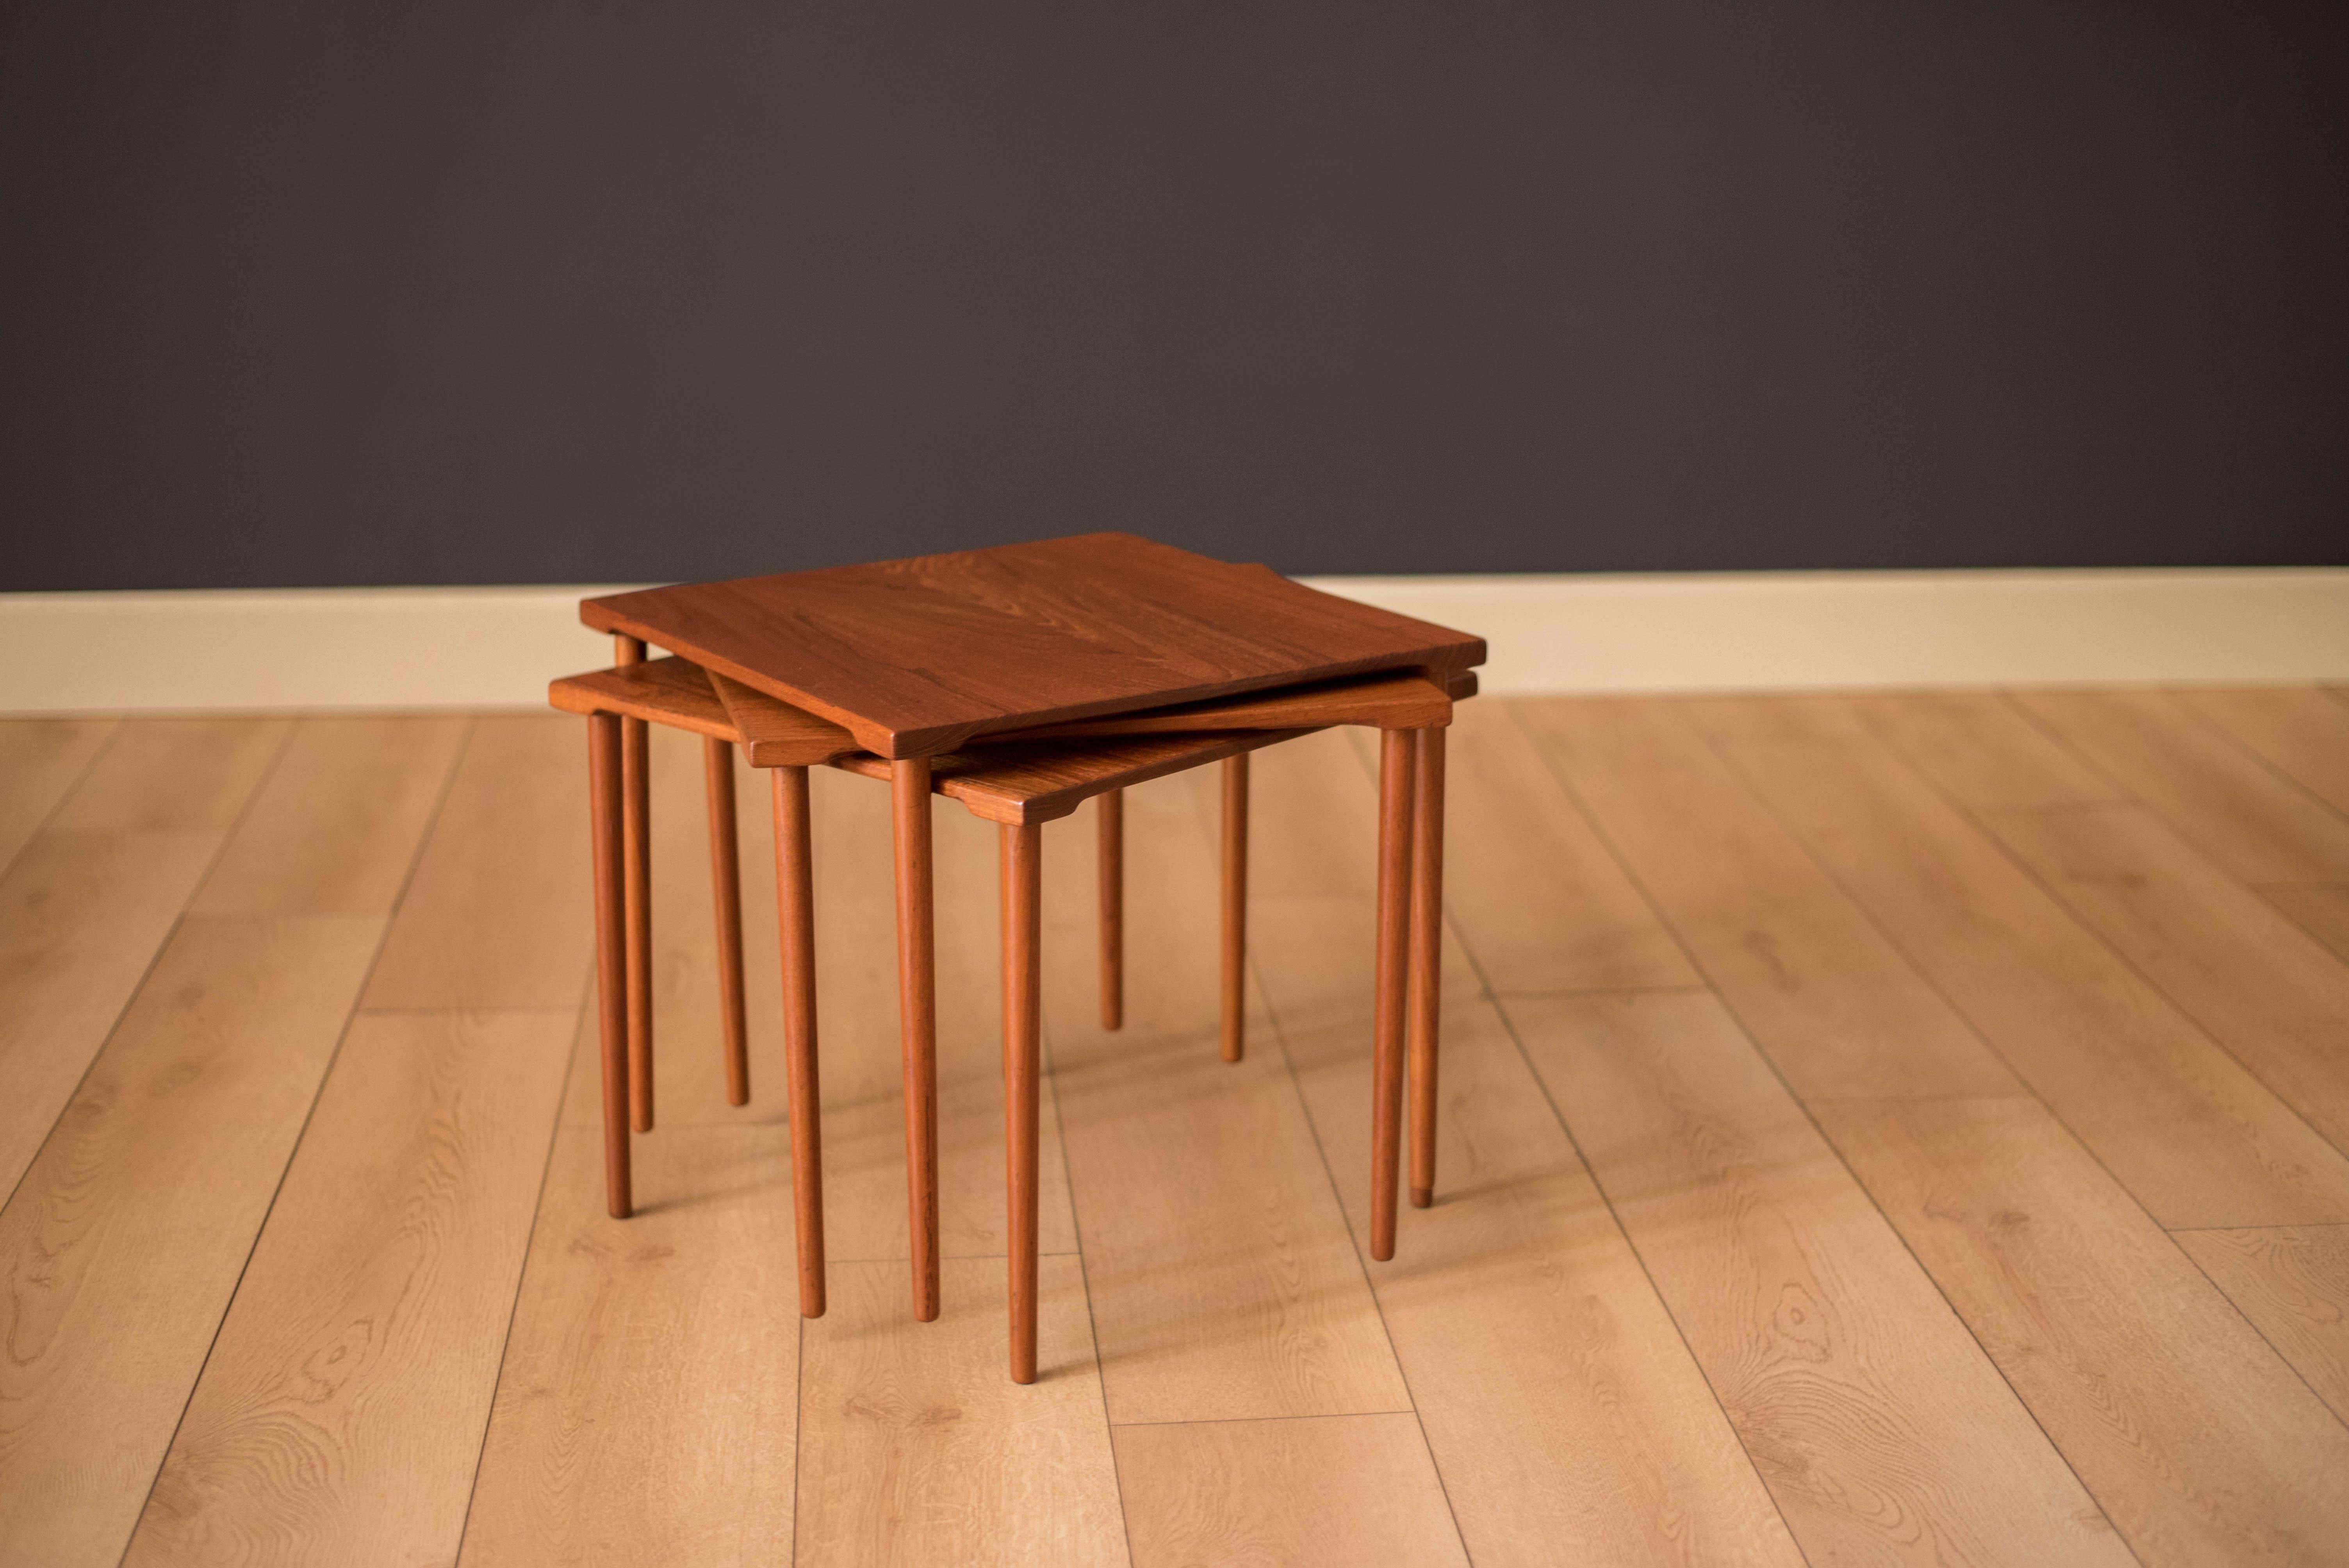 Early mid century set of stacking side tables manufactured by France & Daverkosen, Denmark. Table tops are constructed of solid planked teak with classic slender dowel legs. This set can be used as a coffee table or separate as three end tables.